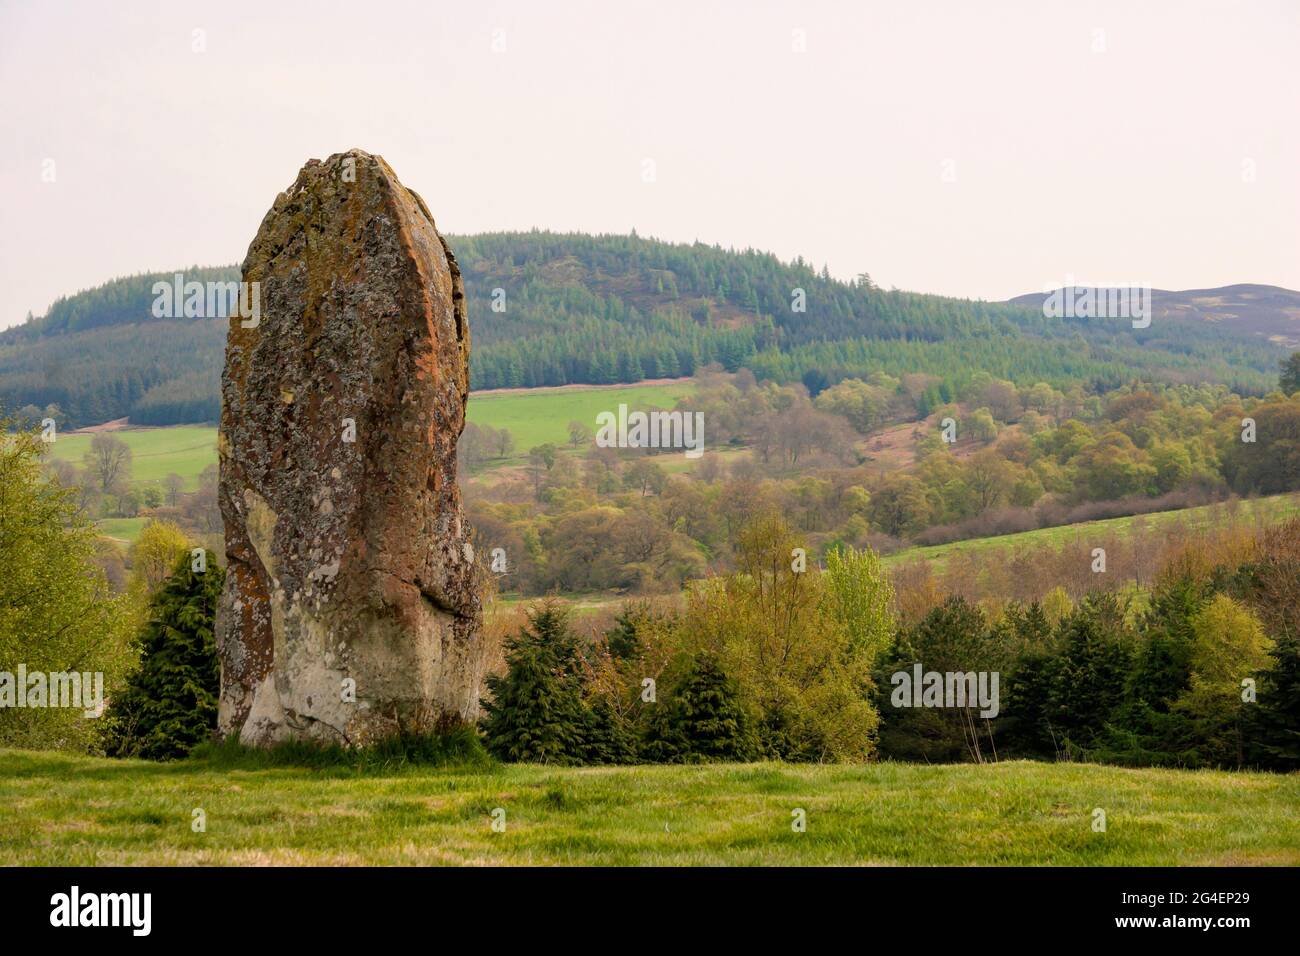 Auchingarrich Standing Stone in the Valley of the River Earn, Comrie, Perthsire, Scotland Stock Photo